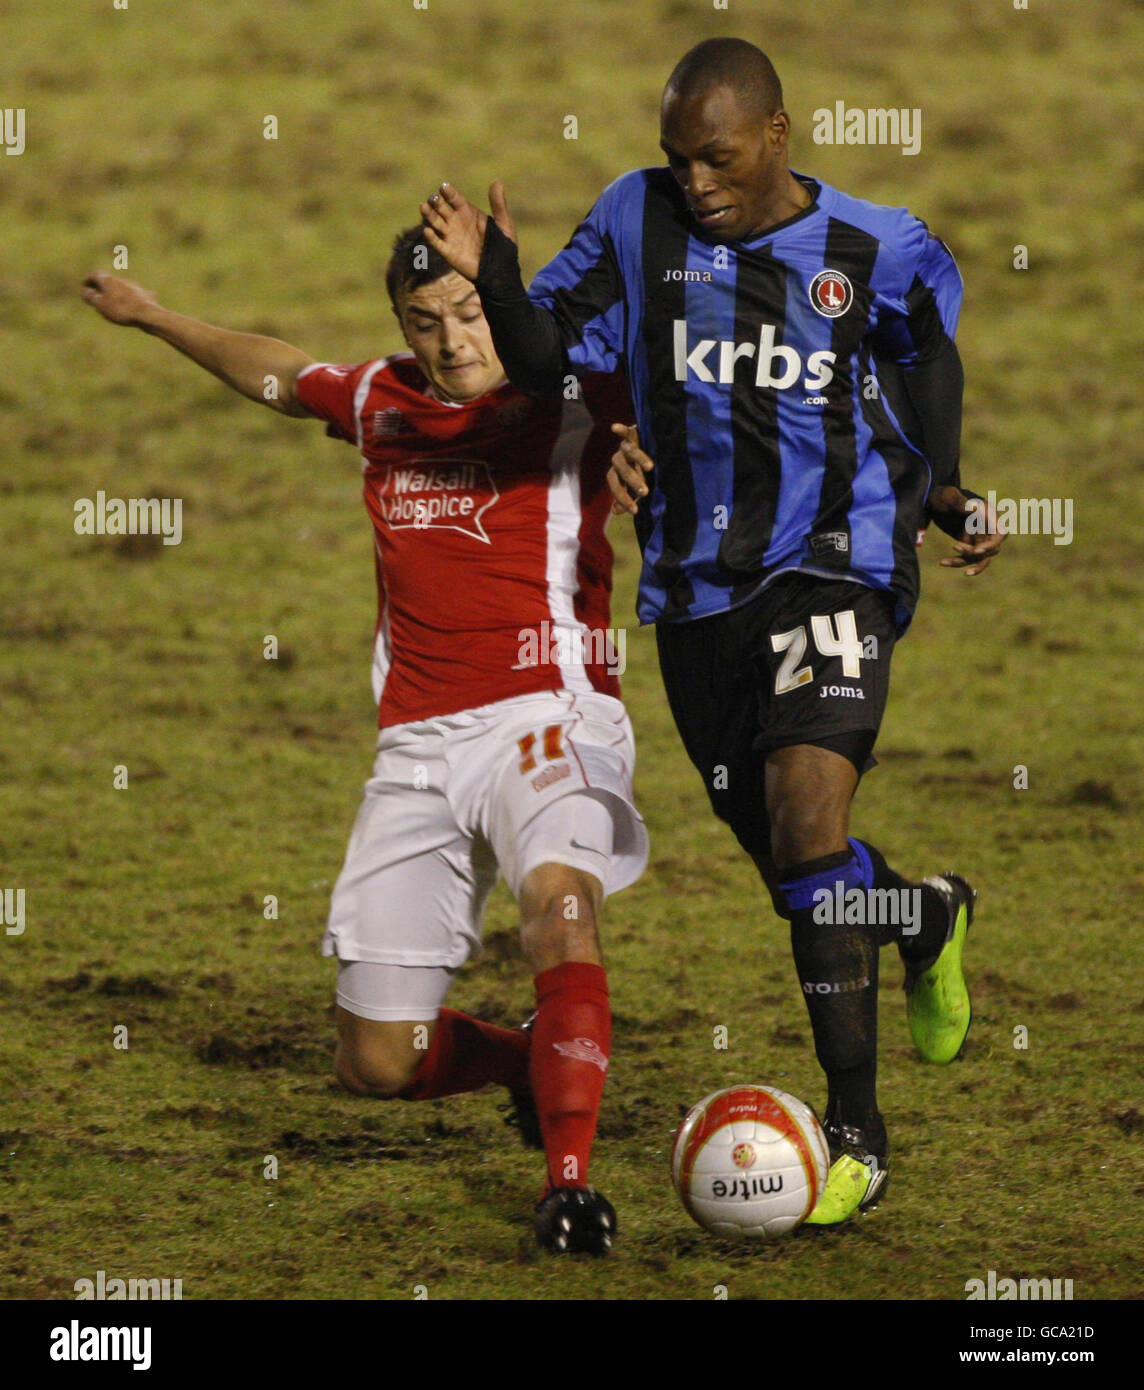 Charlton Athletic's Kyel Reid tussles for ball with Walsall defender Alex Nicholls during the Coca-Cola Football League One match at the Banks Stadium, Walsall. Stock Photo